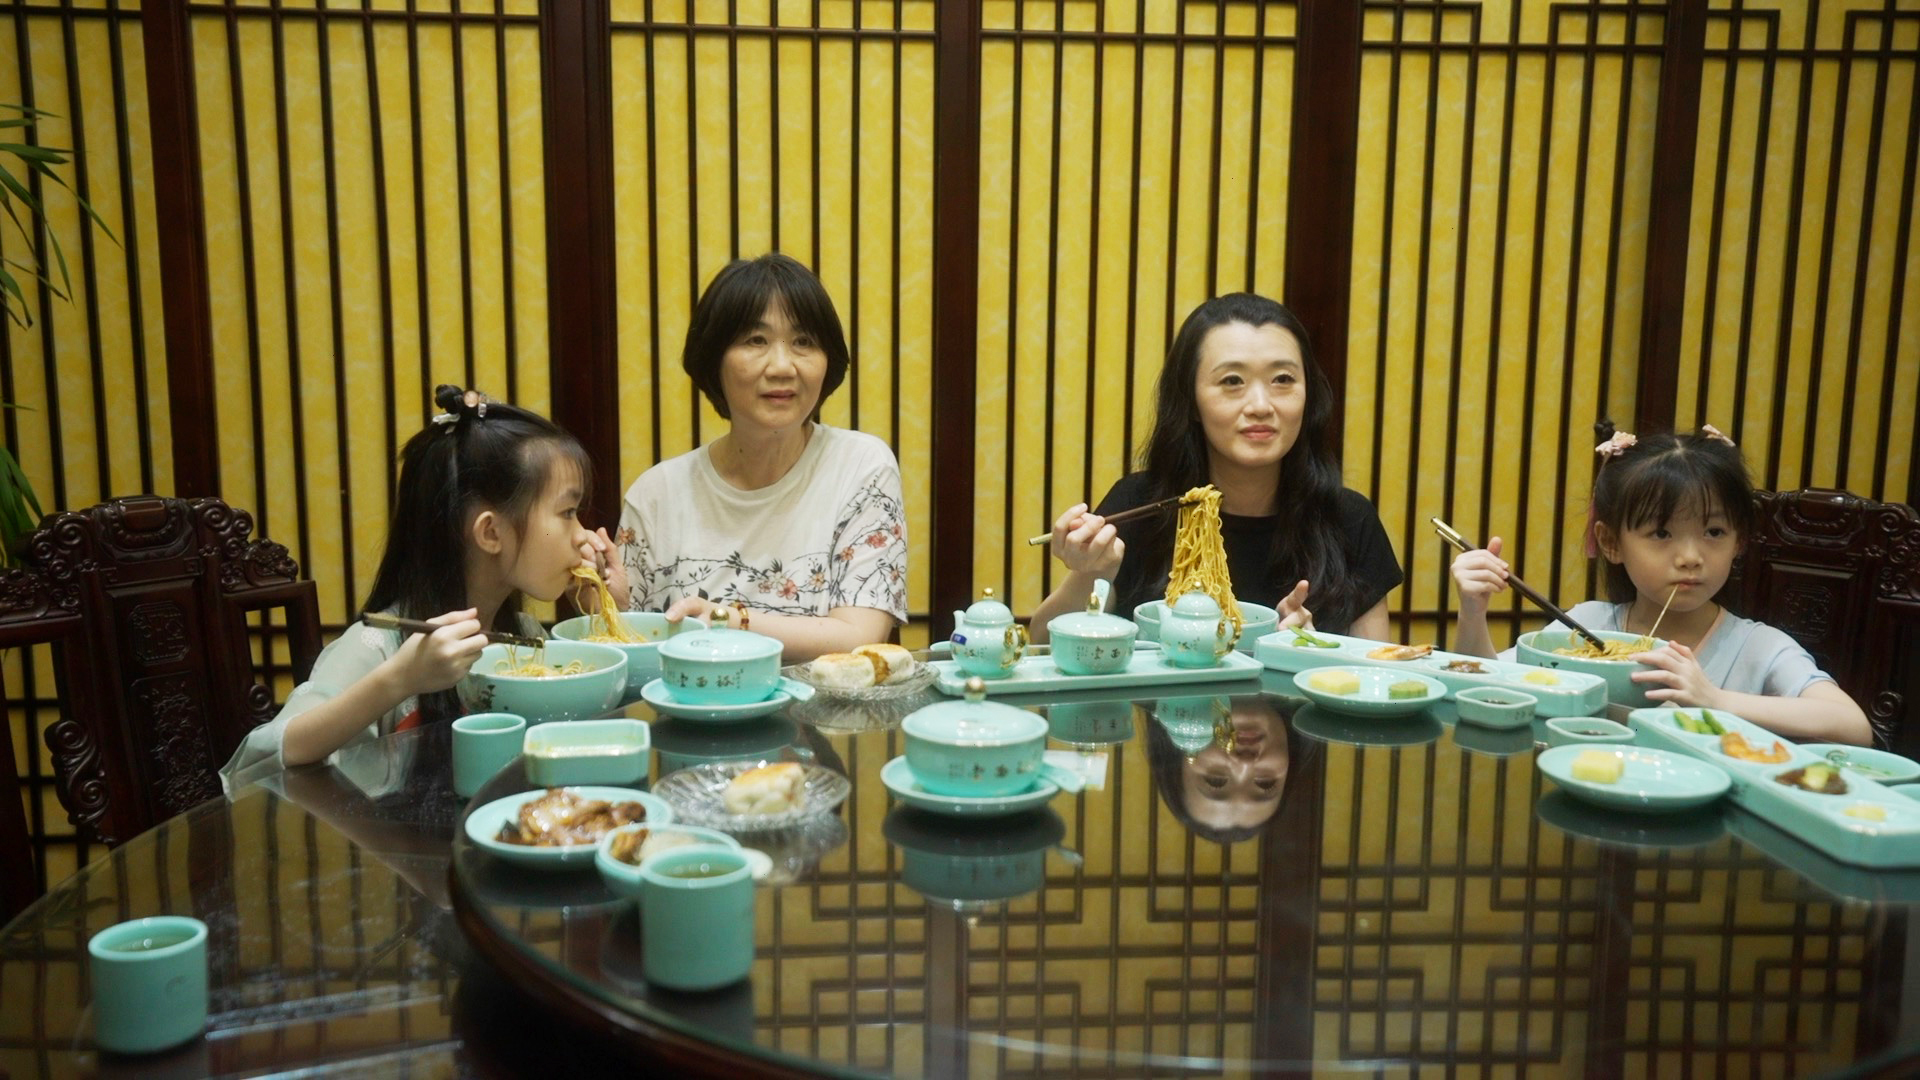 Wang Yu-chen (2nd from right), her mother Hsieh Chiu-jung and her two daughters eat Su-style noodles at a restaurant in Suzhou, Jiangsu Province, China. /CGTN